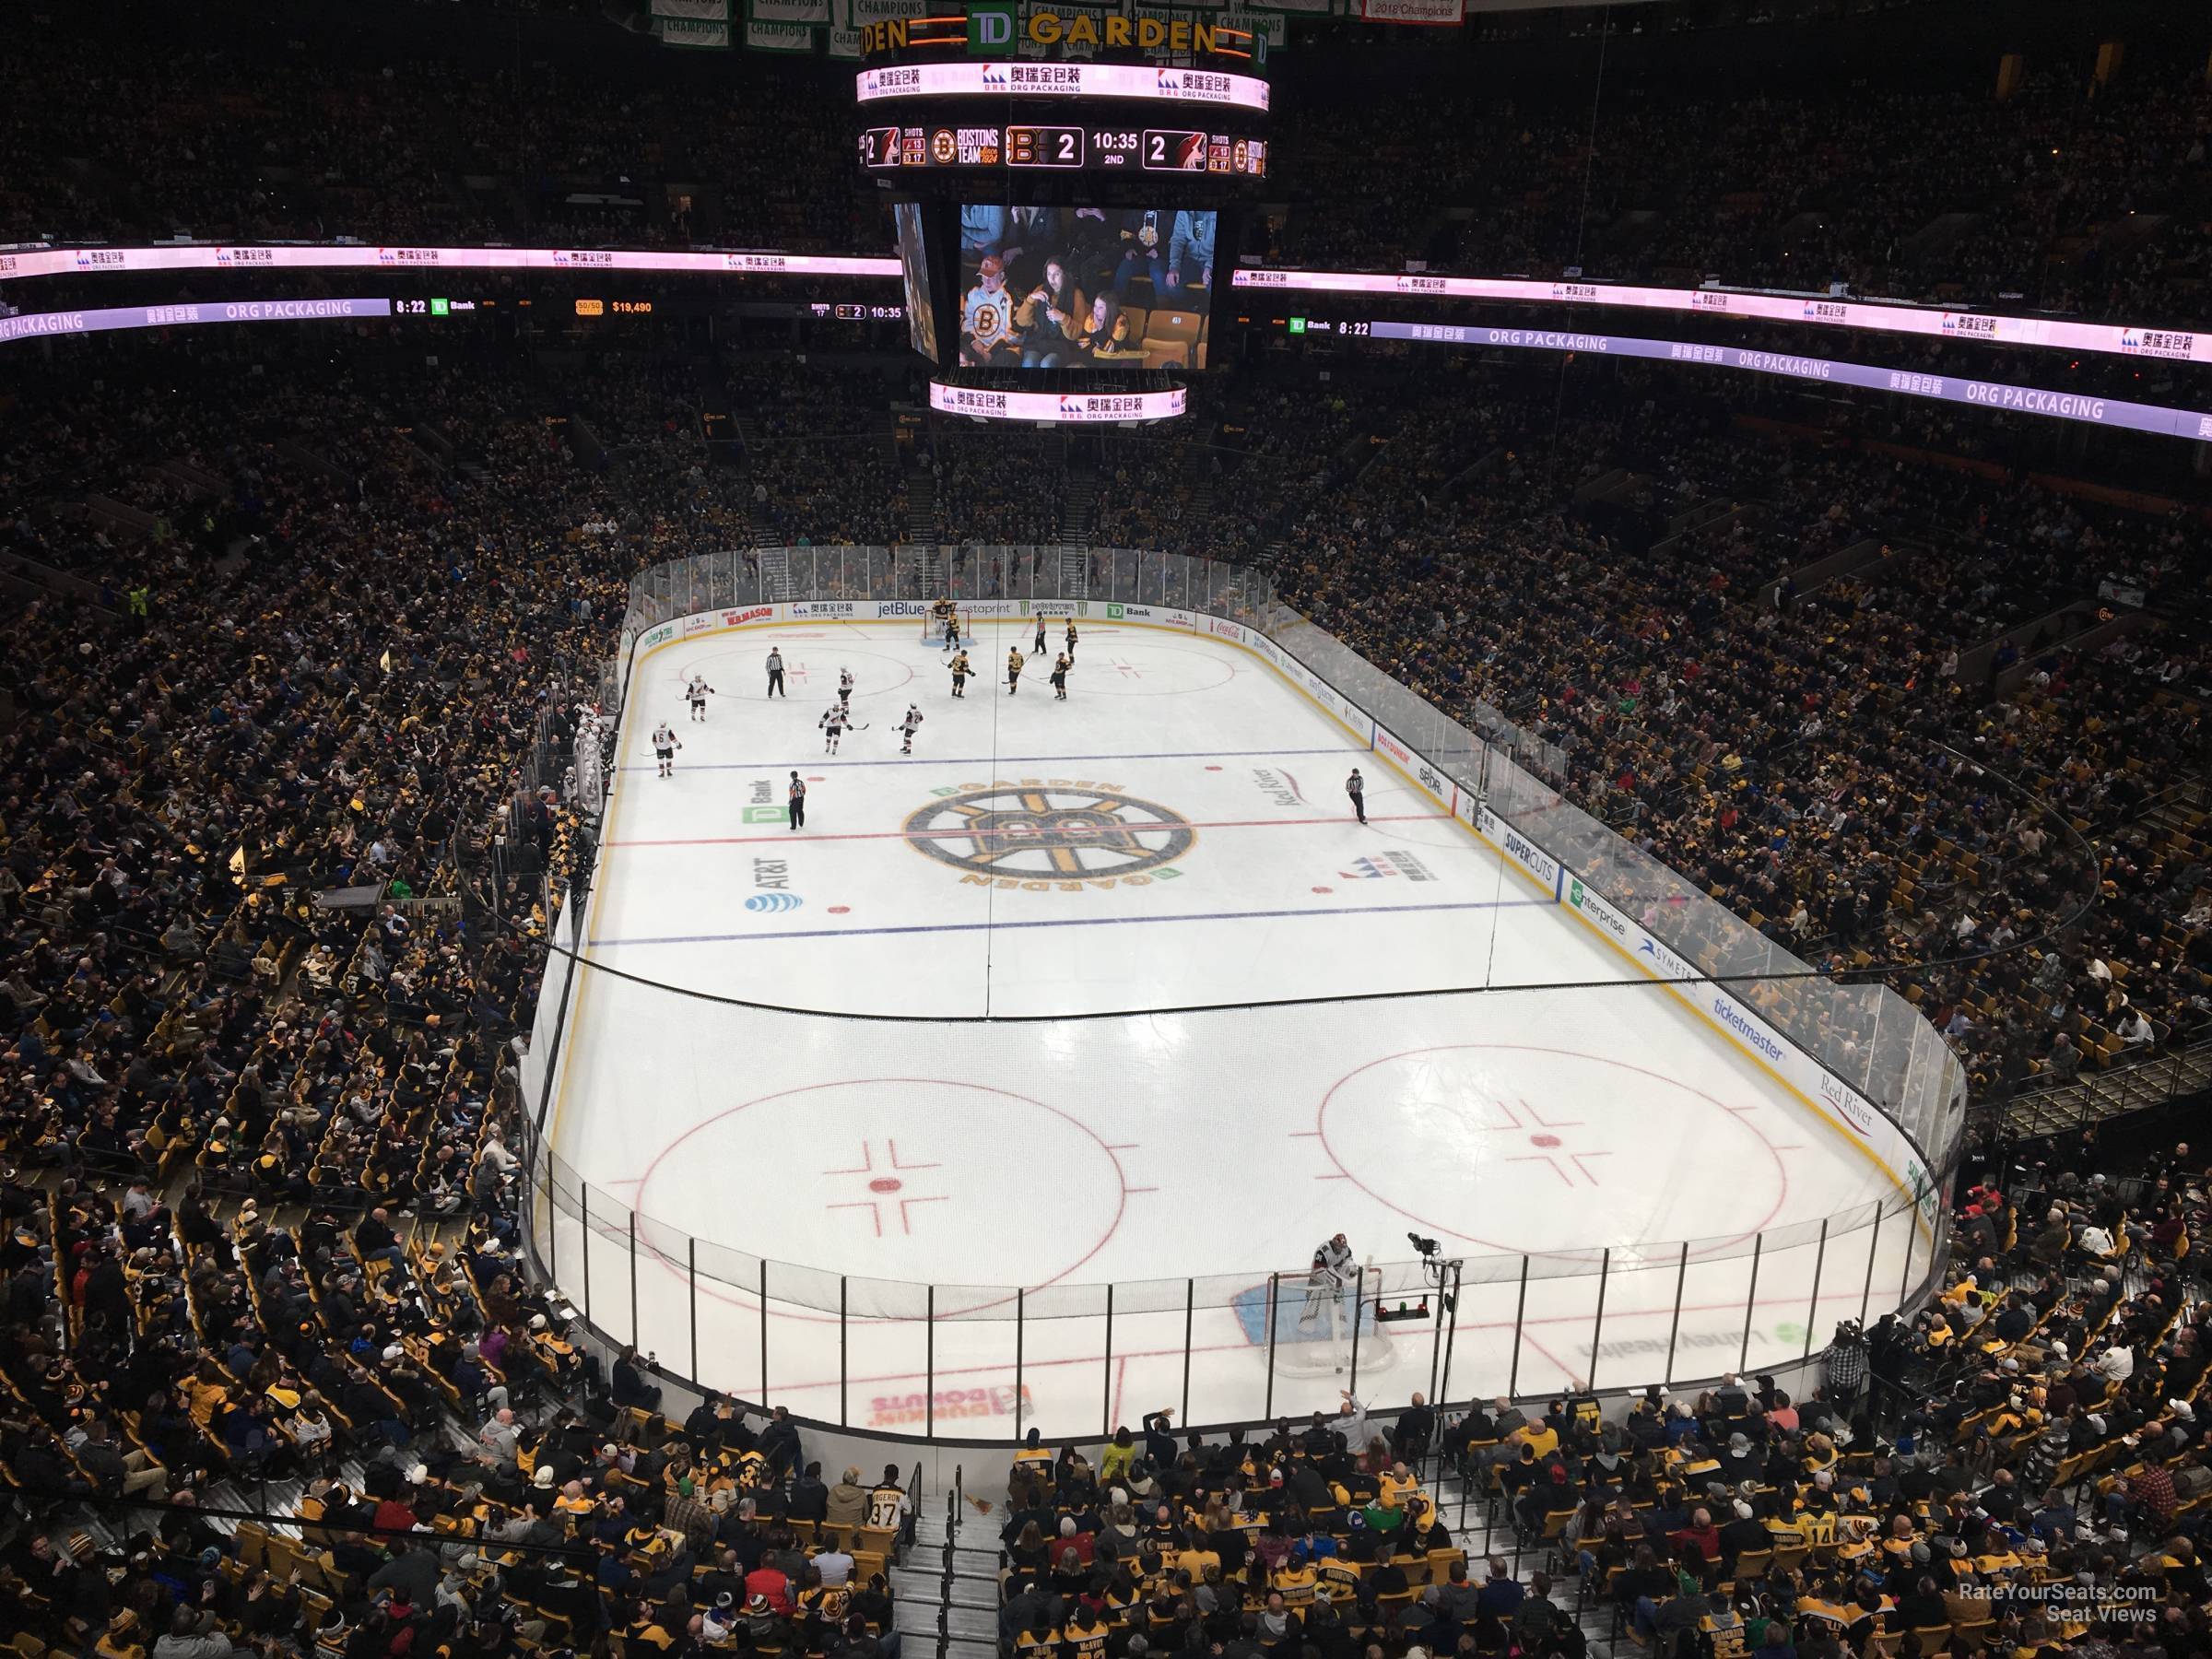 section 324, row 3 seat view  for hockey - td garden